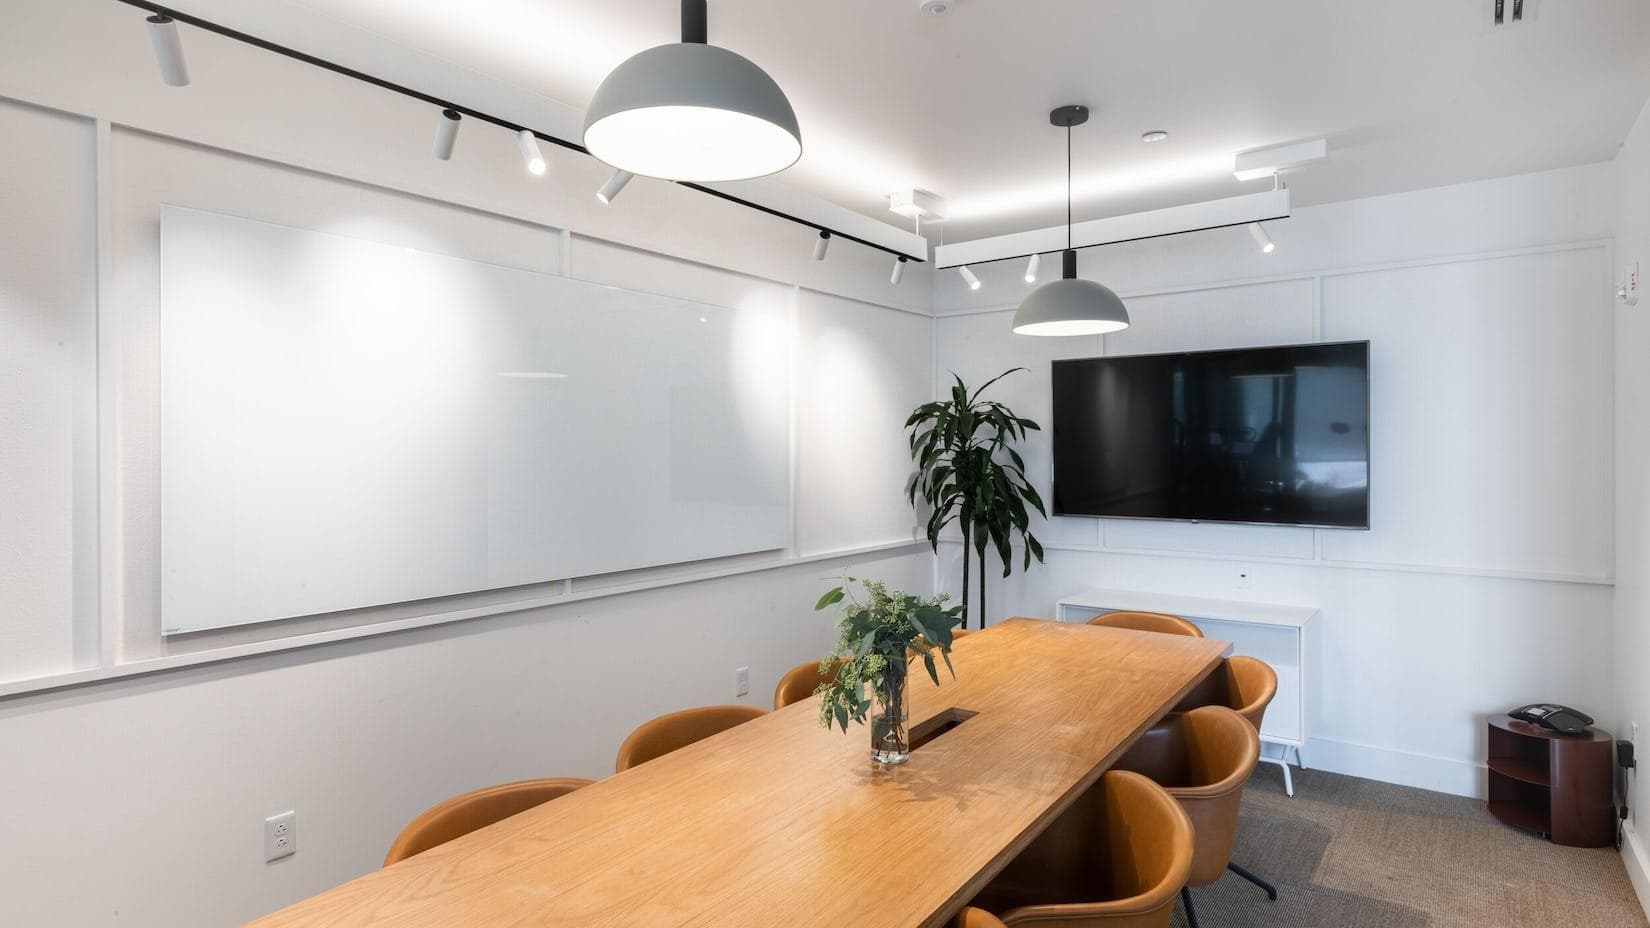 A Conference room in the College Park WeWork space. Clean dry erase boards, a TV screen and some office plants decorate the space along with the table and brown leather chairs.